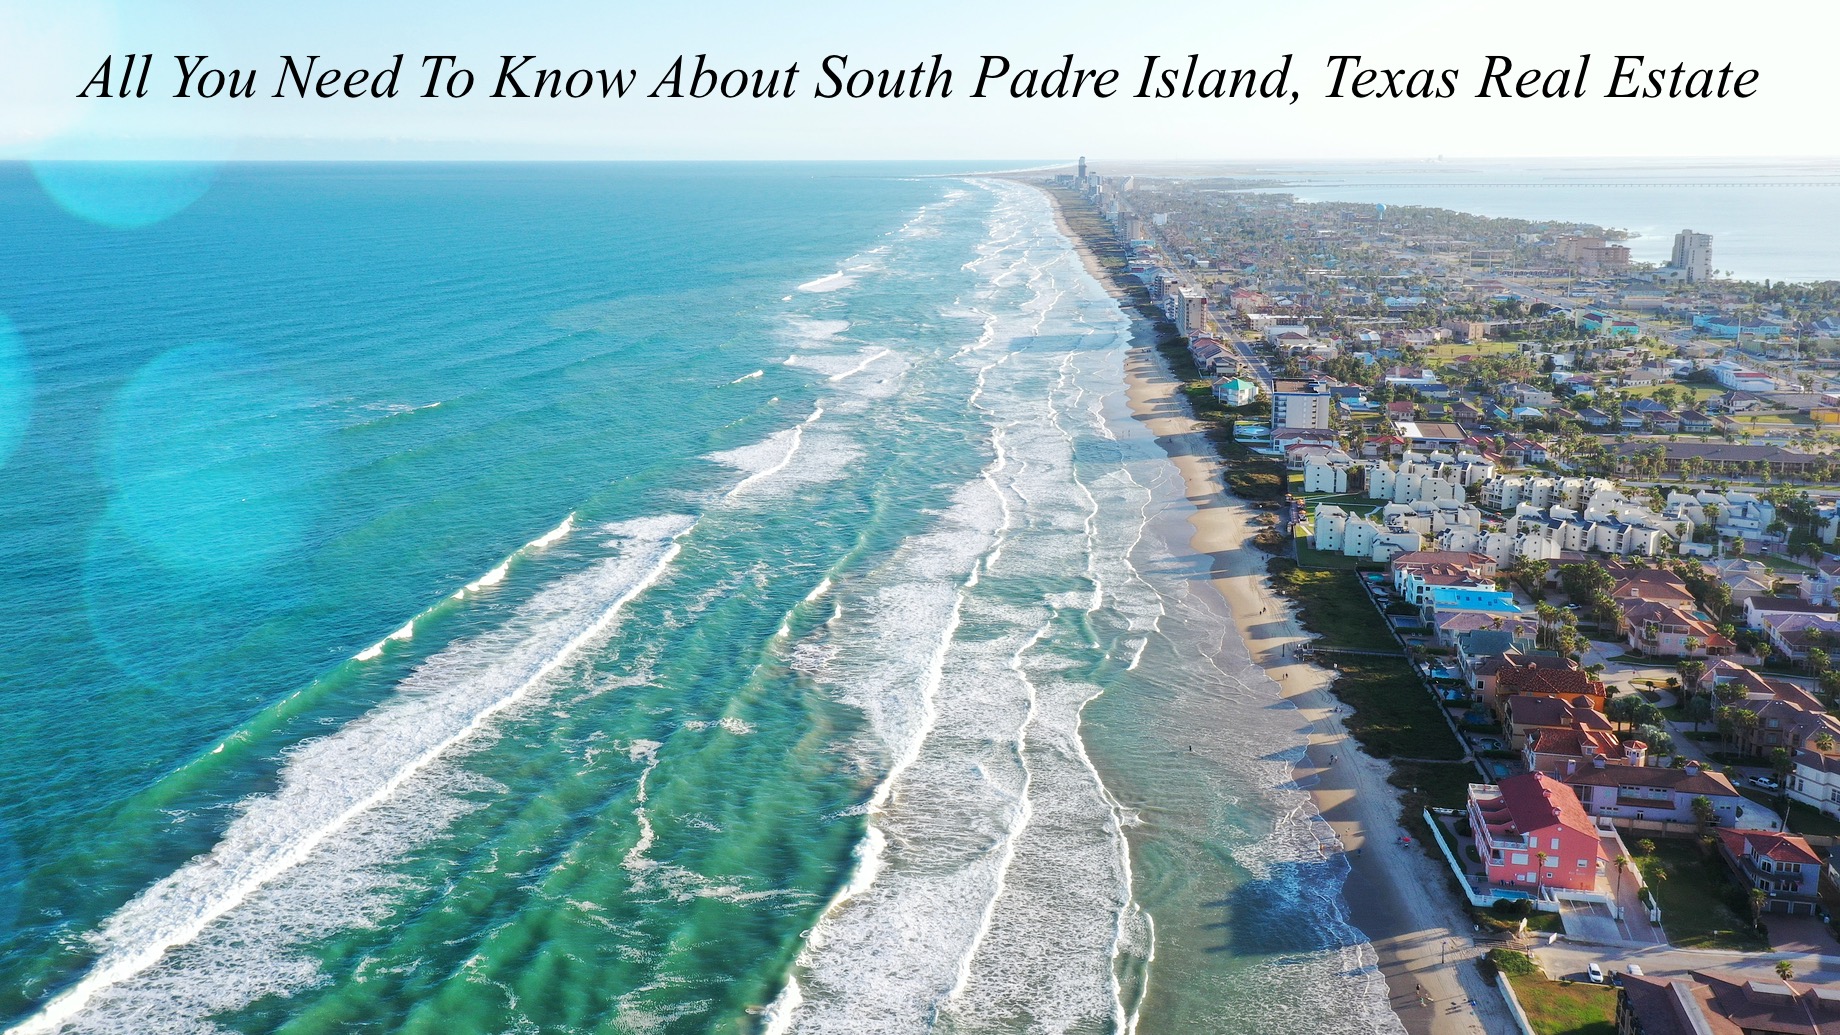 All You Need To Know About South Padre Island, Texas Real Estate